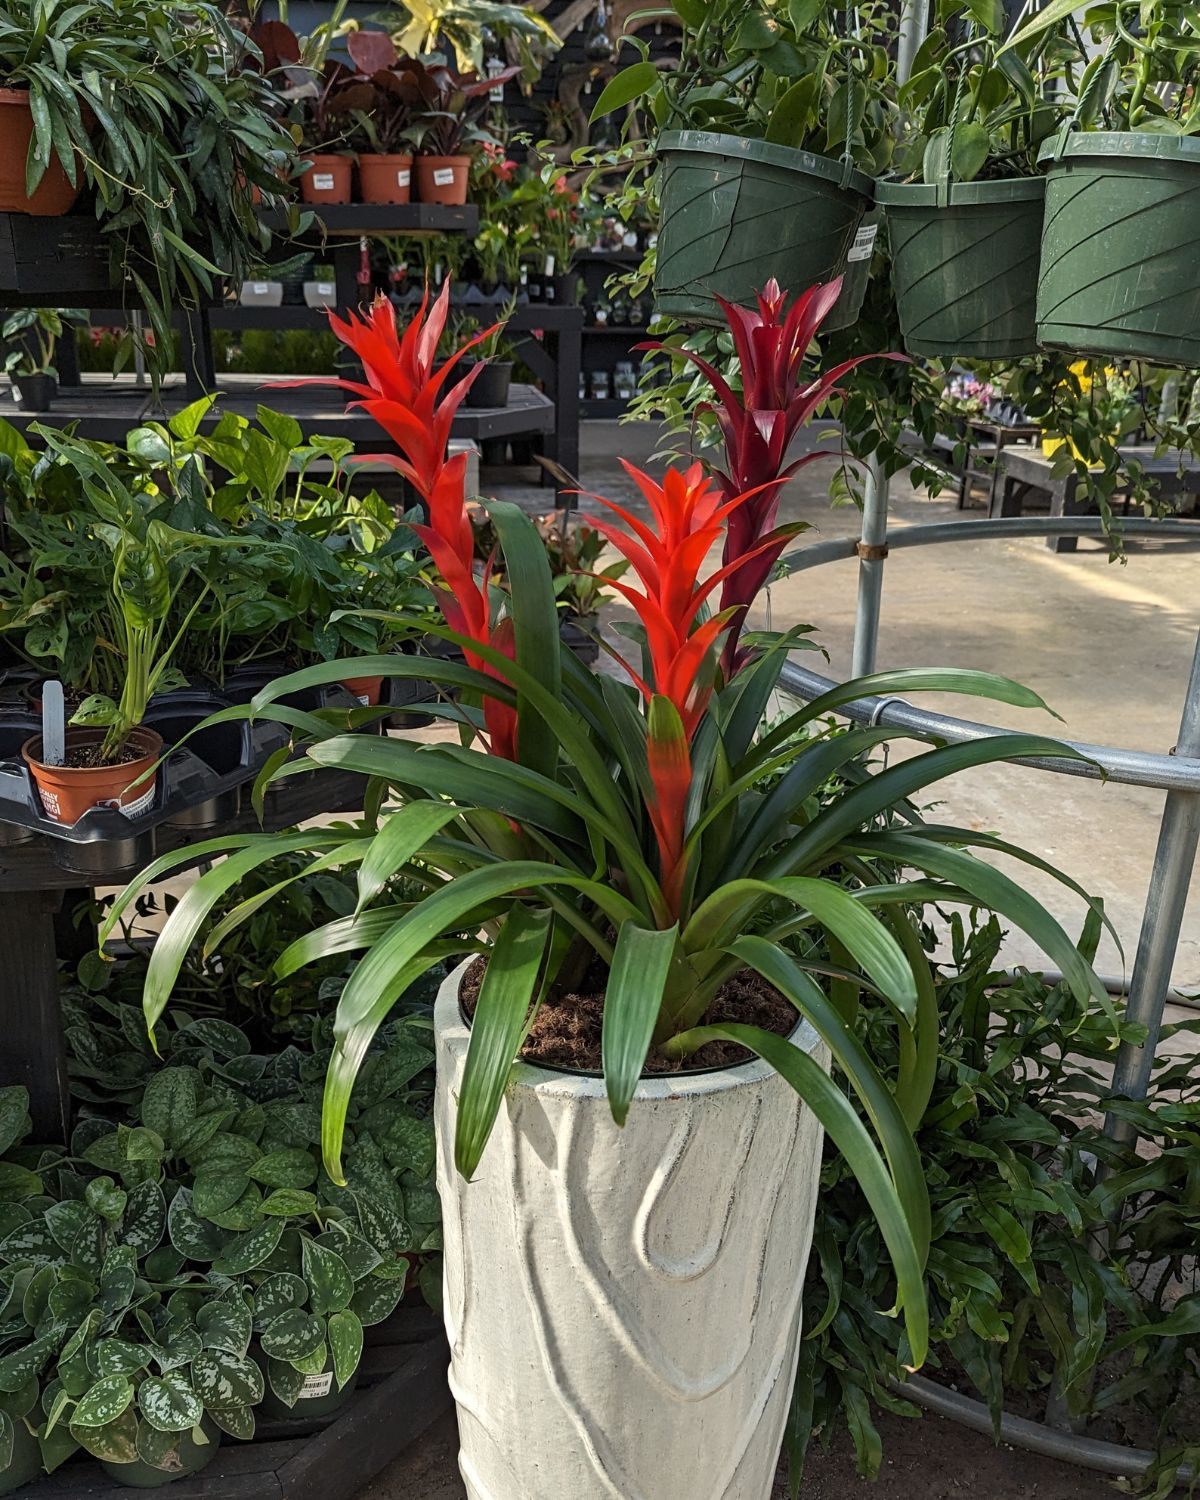 Three large, red-blooming guzmania bromeliad plants potted together in a tall, white ceramic pot.